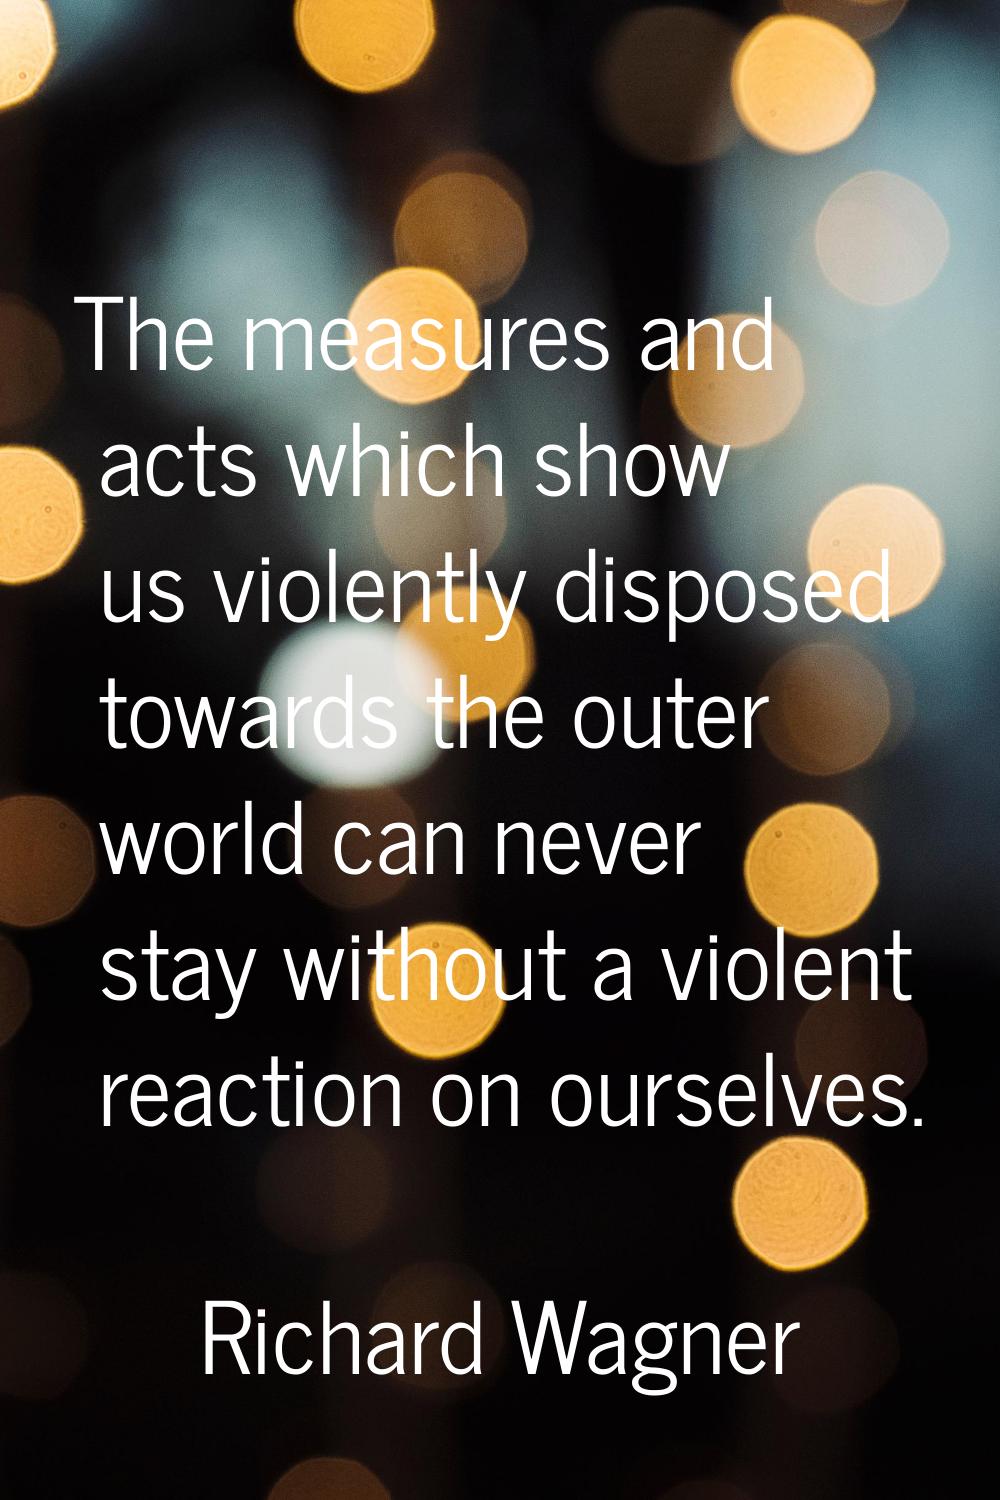 The measures and acts which show us violently disposed towards the outer world can never stay witho